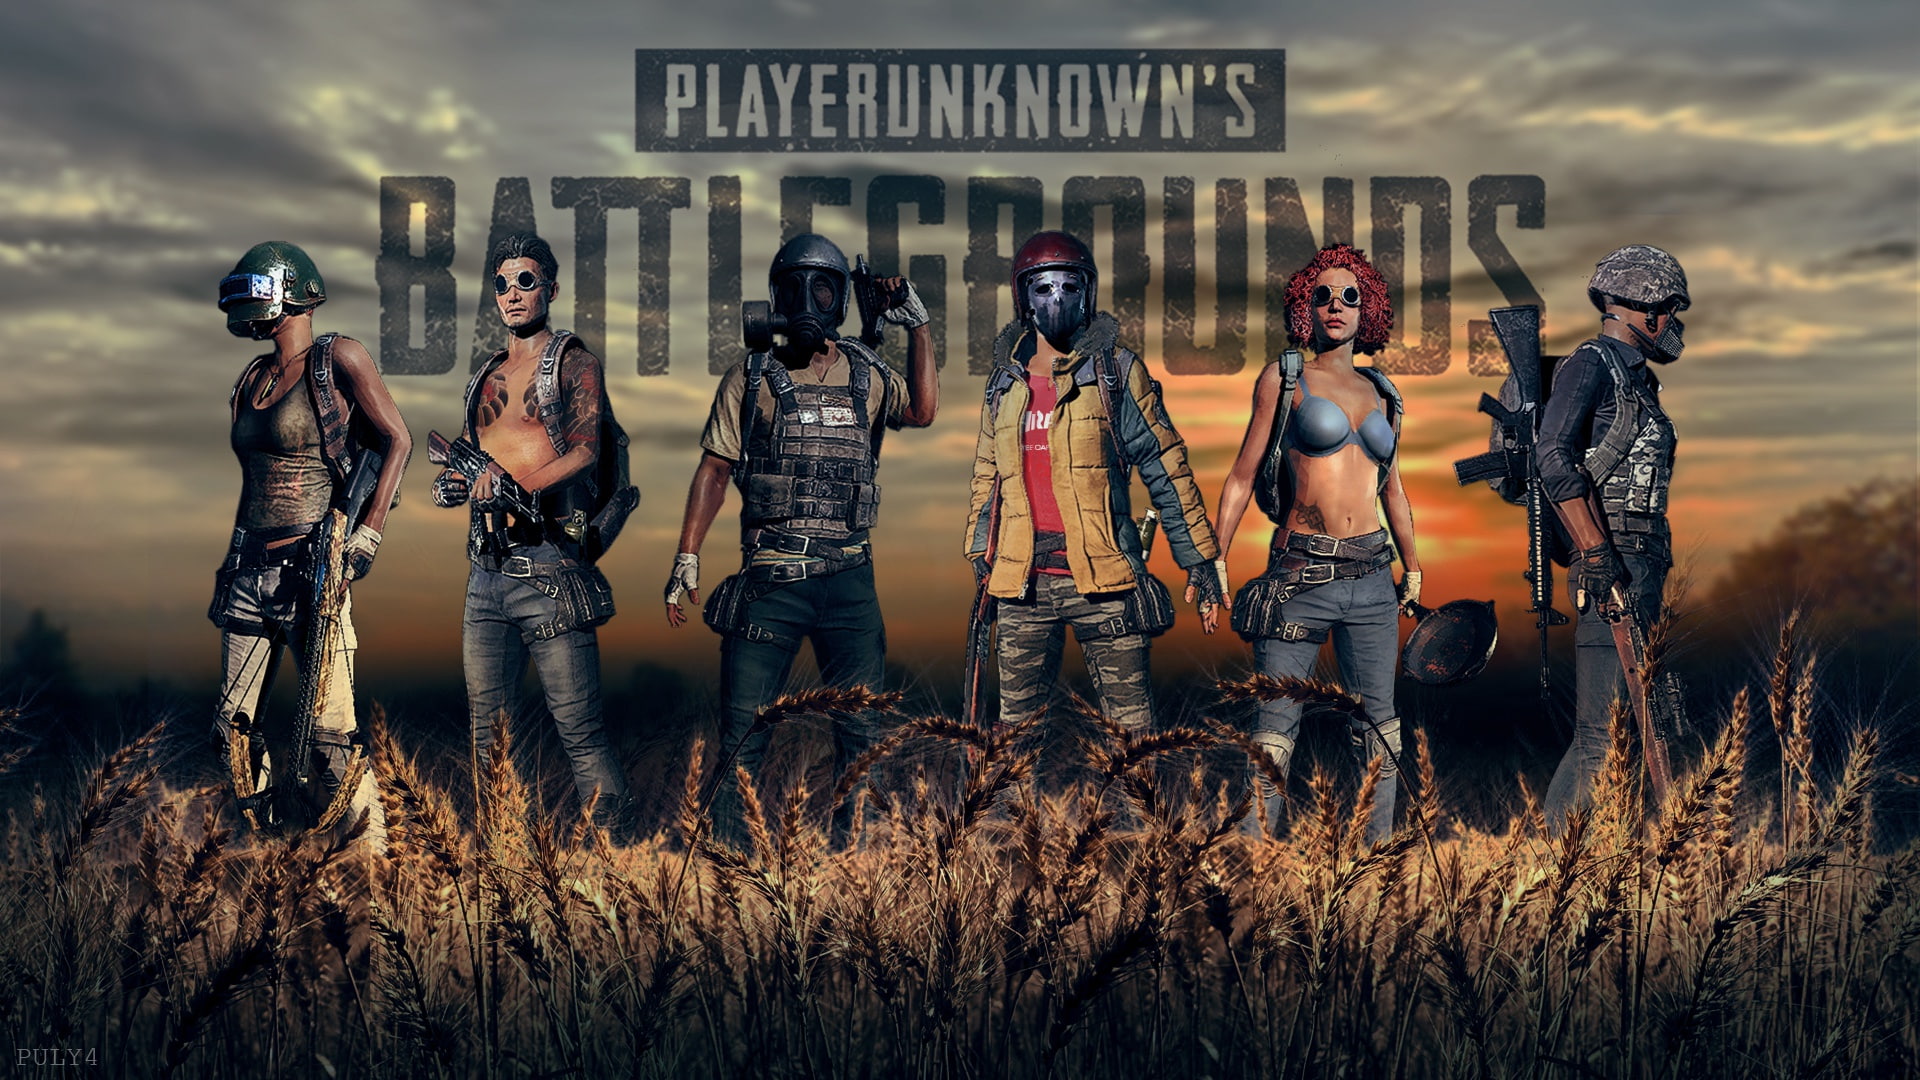 game, the game, games, pubg, playerunknowns